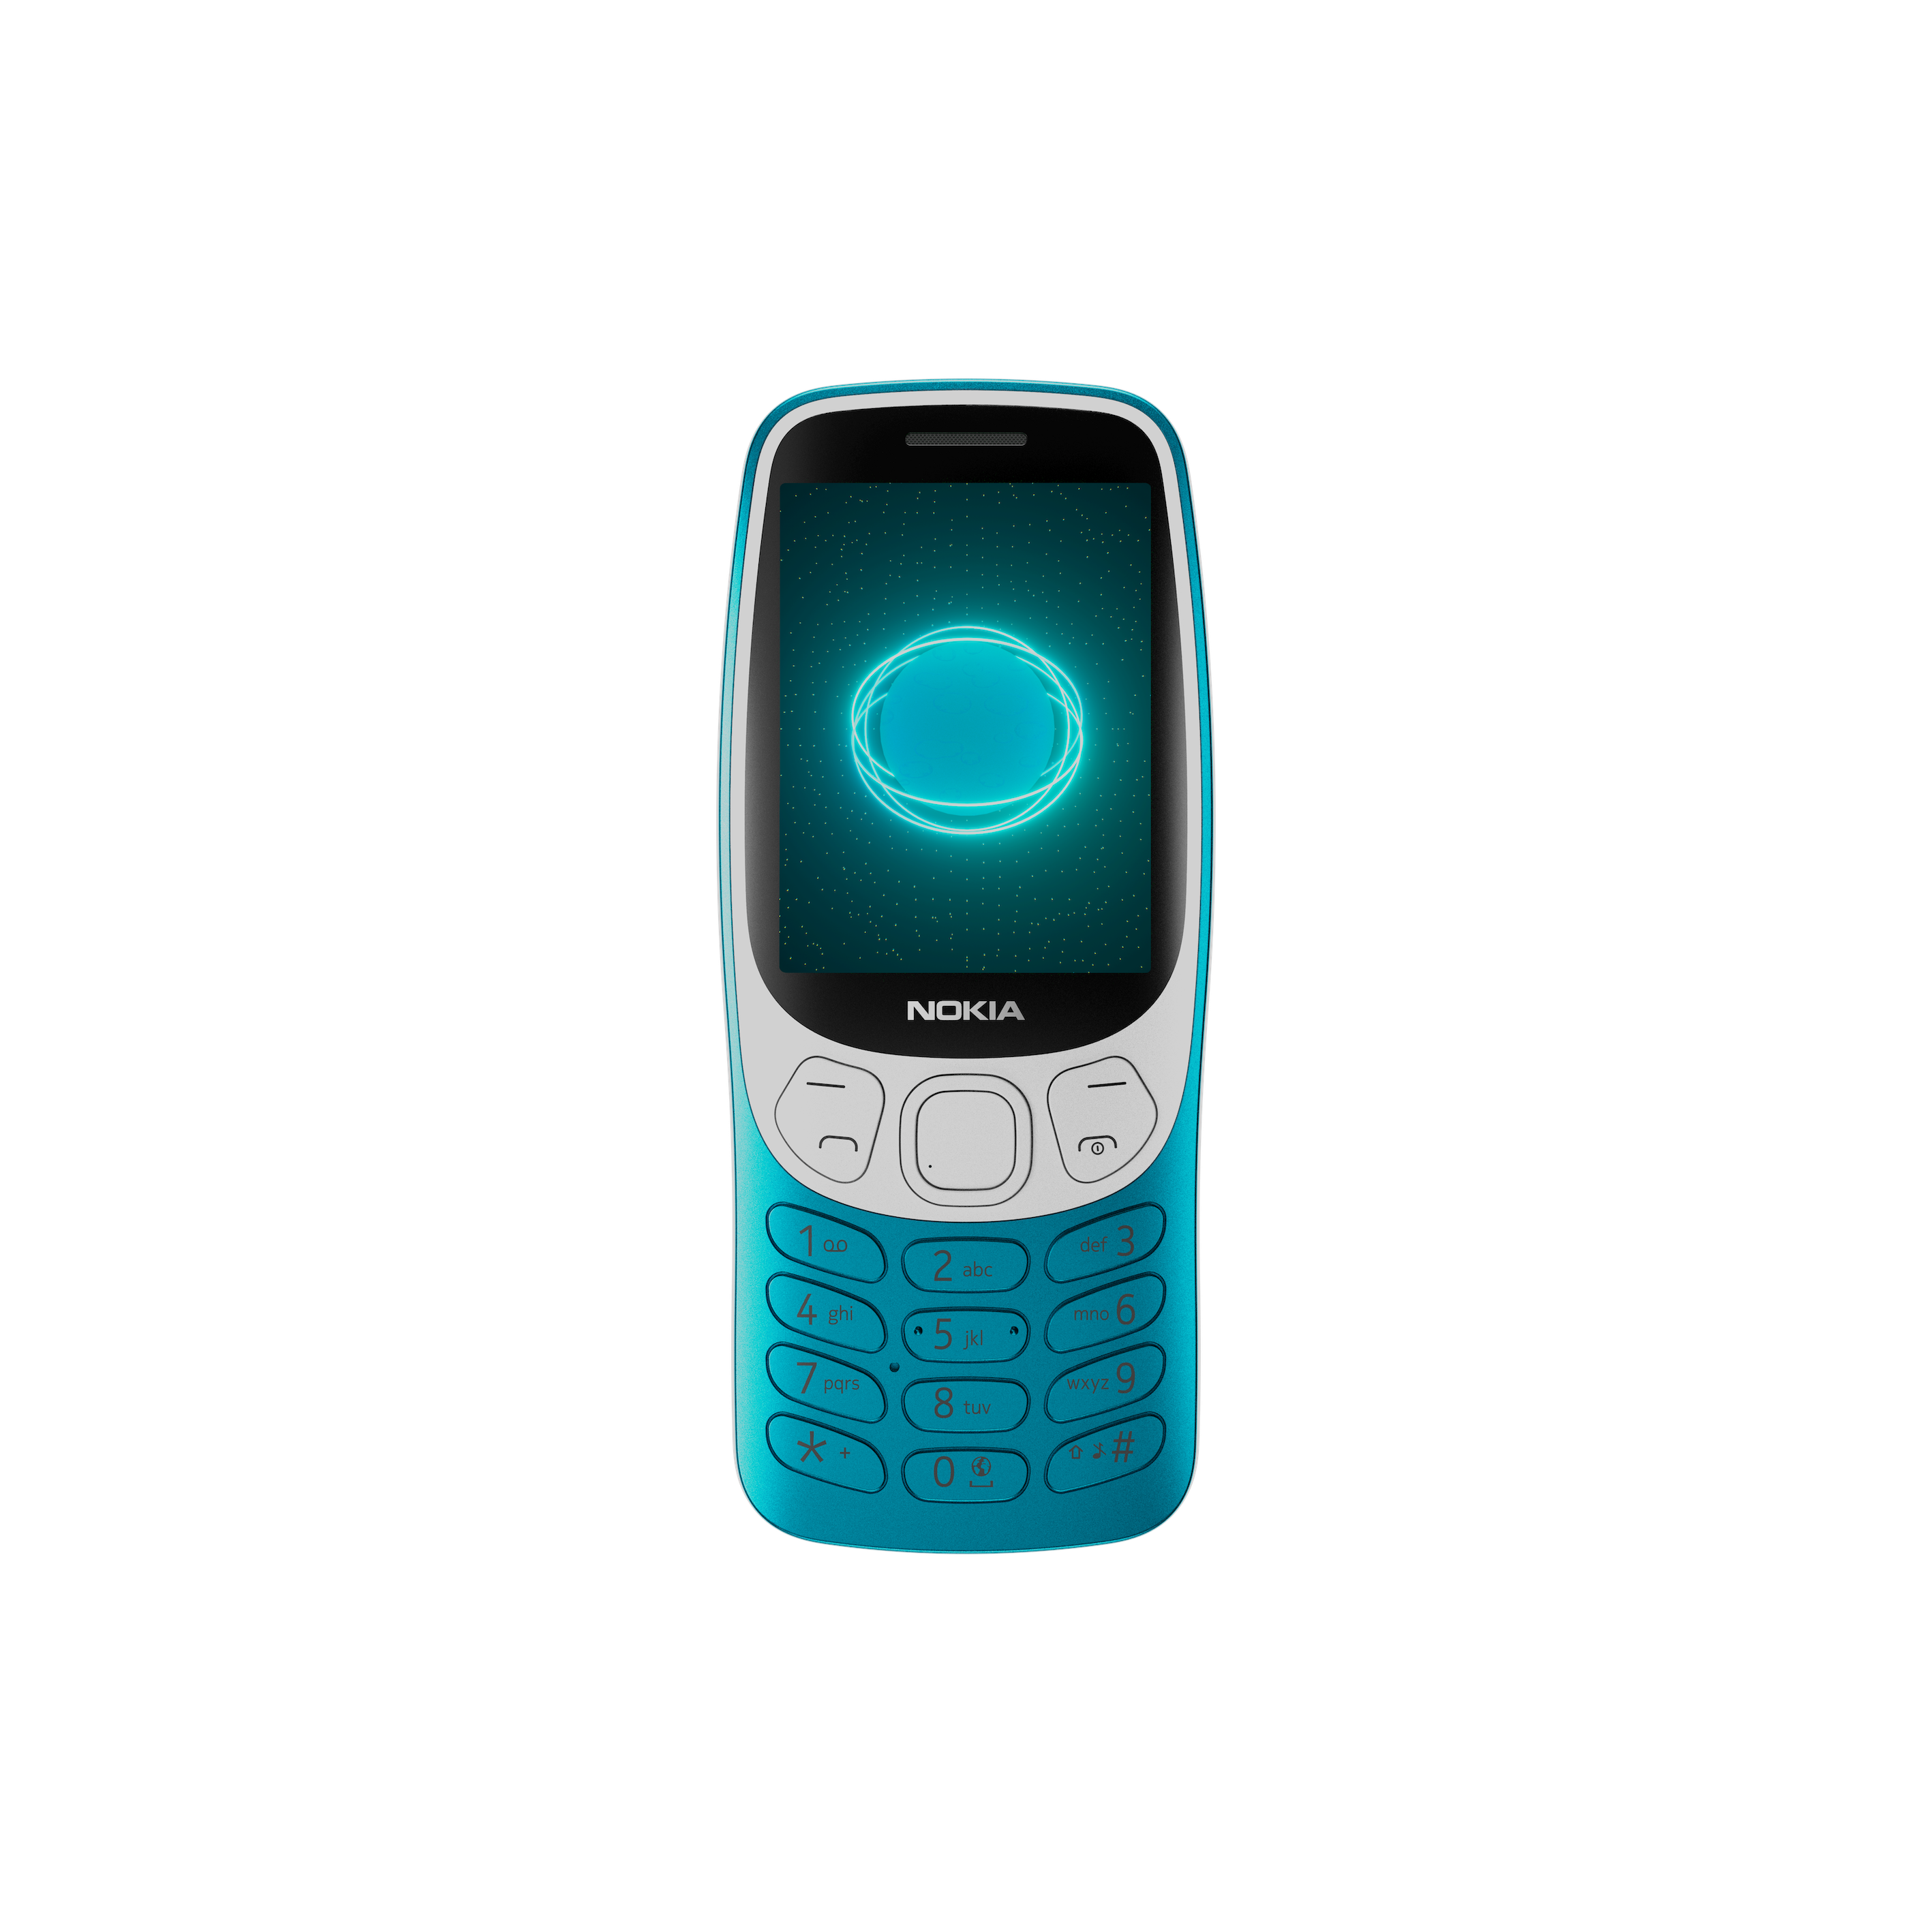 nokia 3210 gets an update for its 25th anniversary, with original hallmarks to please old-school fans